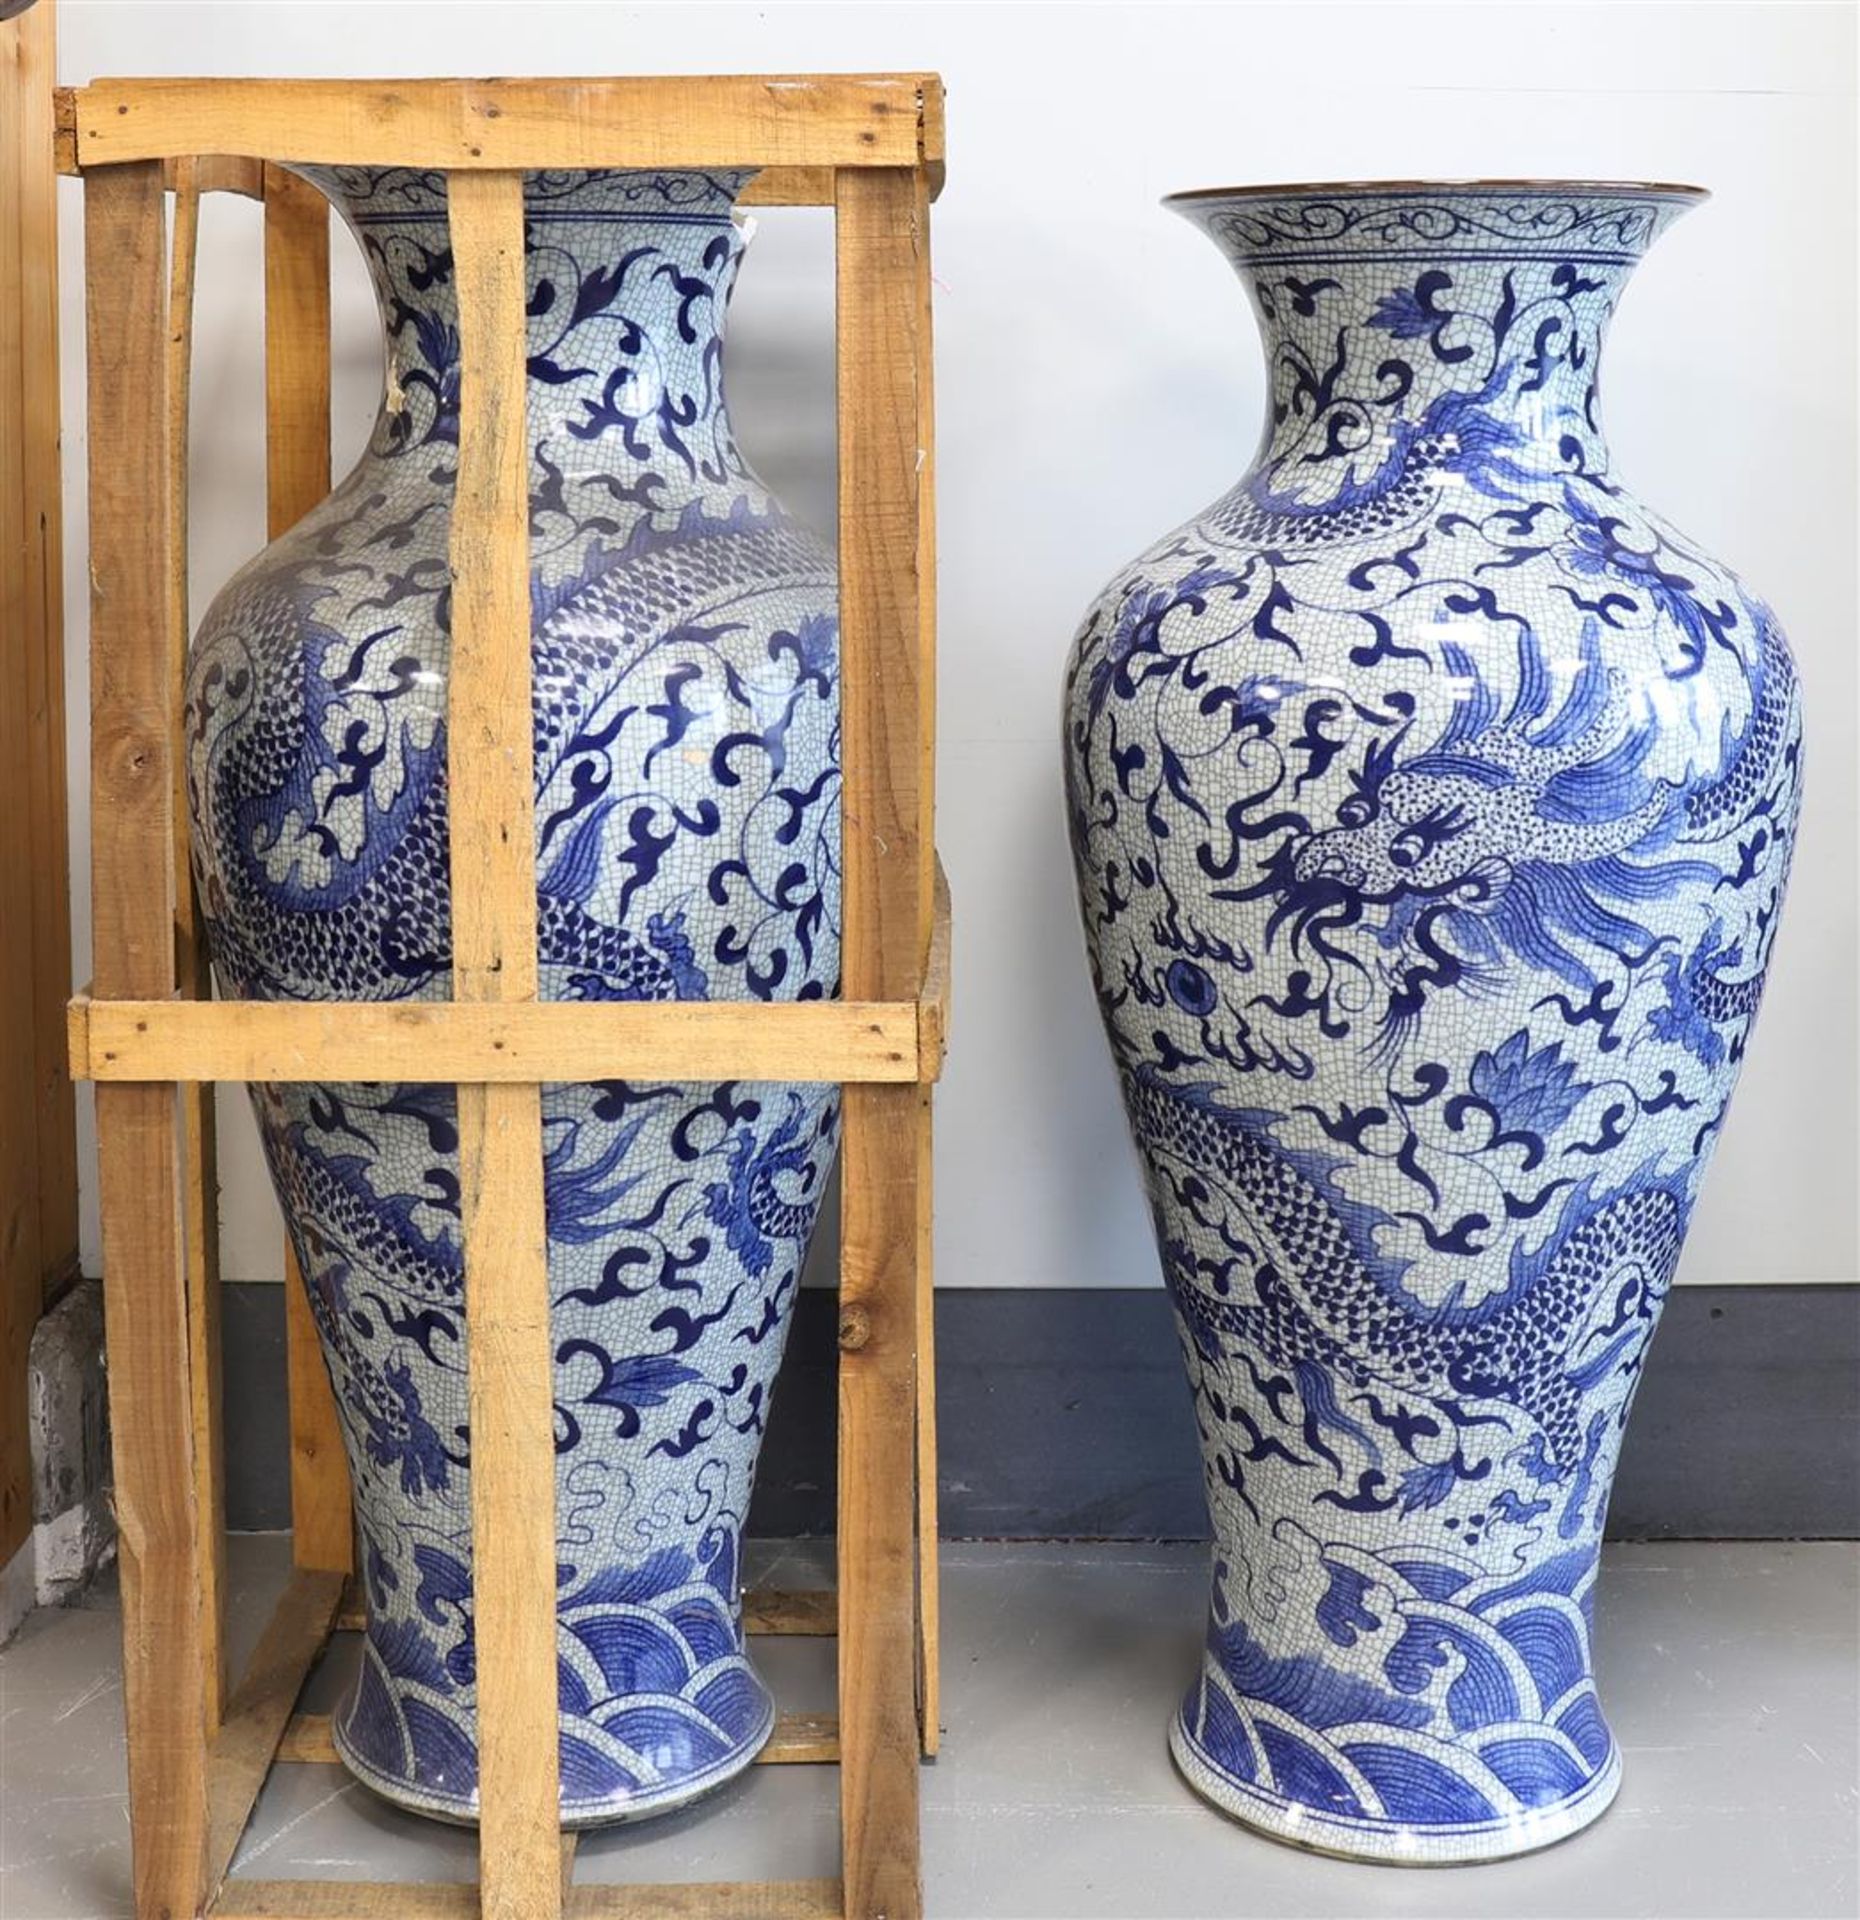 A pair of blue and white porcelain baluster vases, China, 21st century.